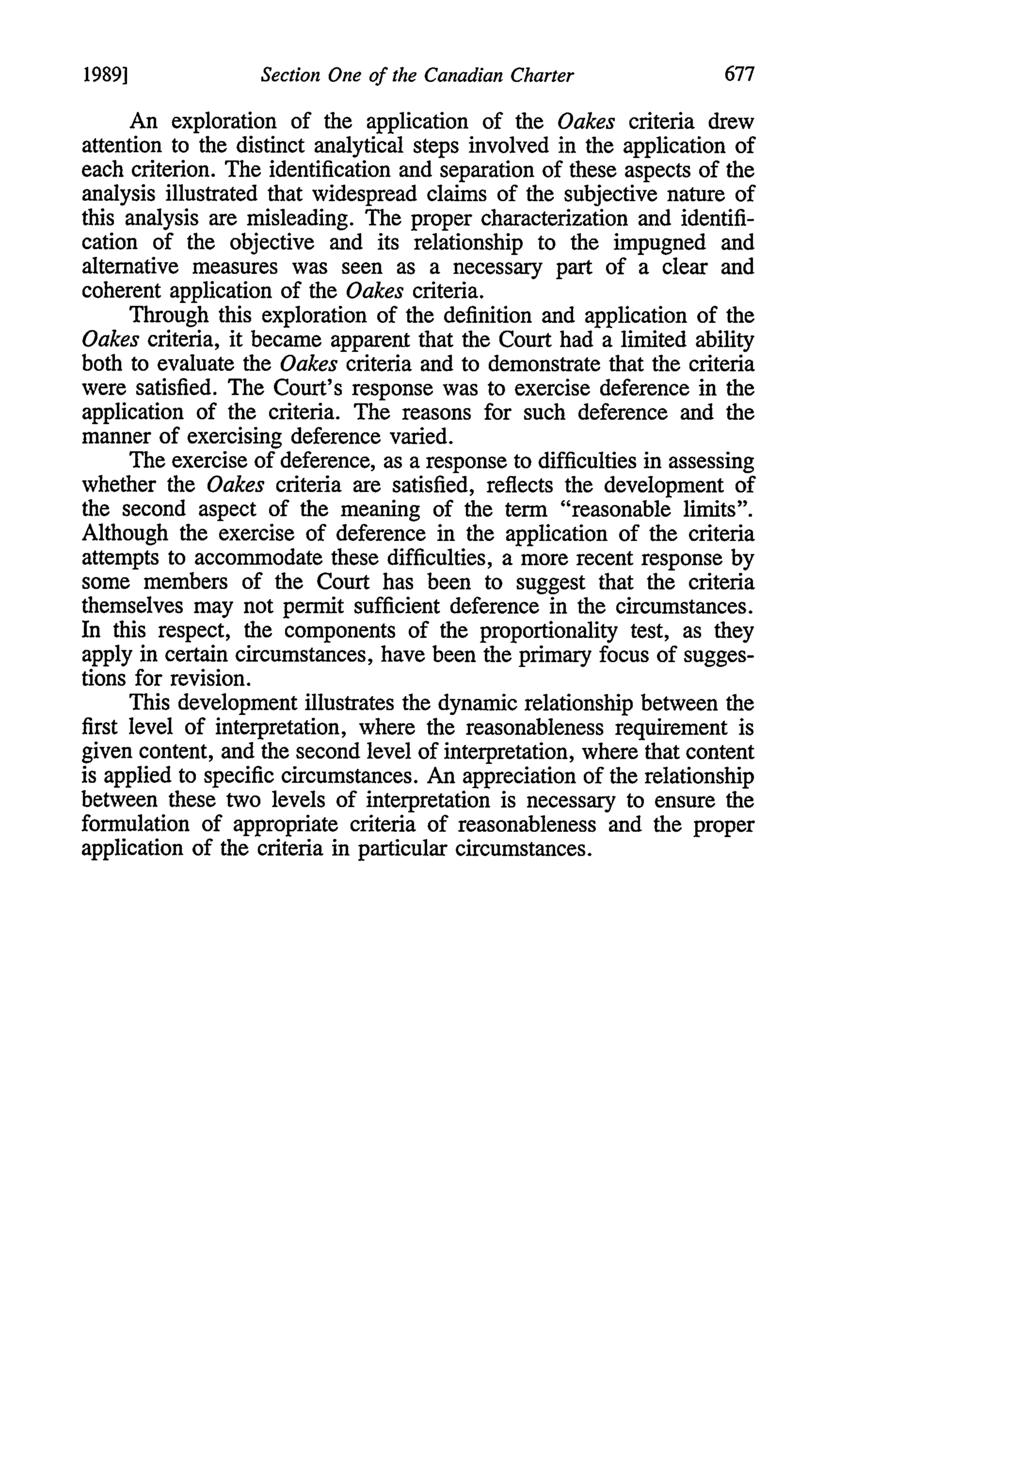 19891 Section One of the Canadian Charter An exploration of the application of the Oakes criteria drew attention to the distinct analytical steps involved in the application of each criterion.